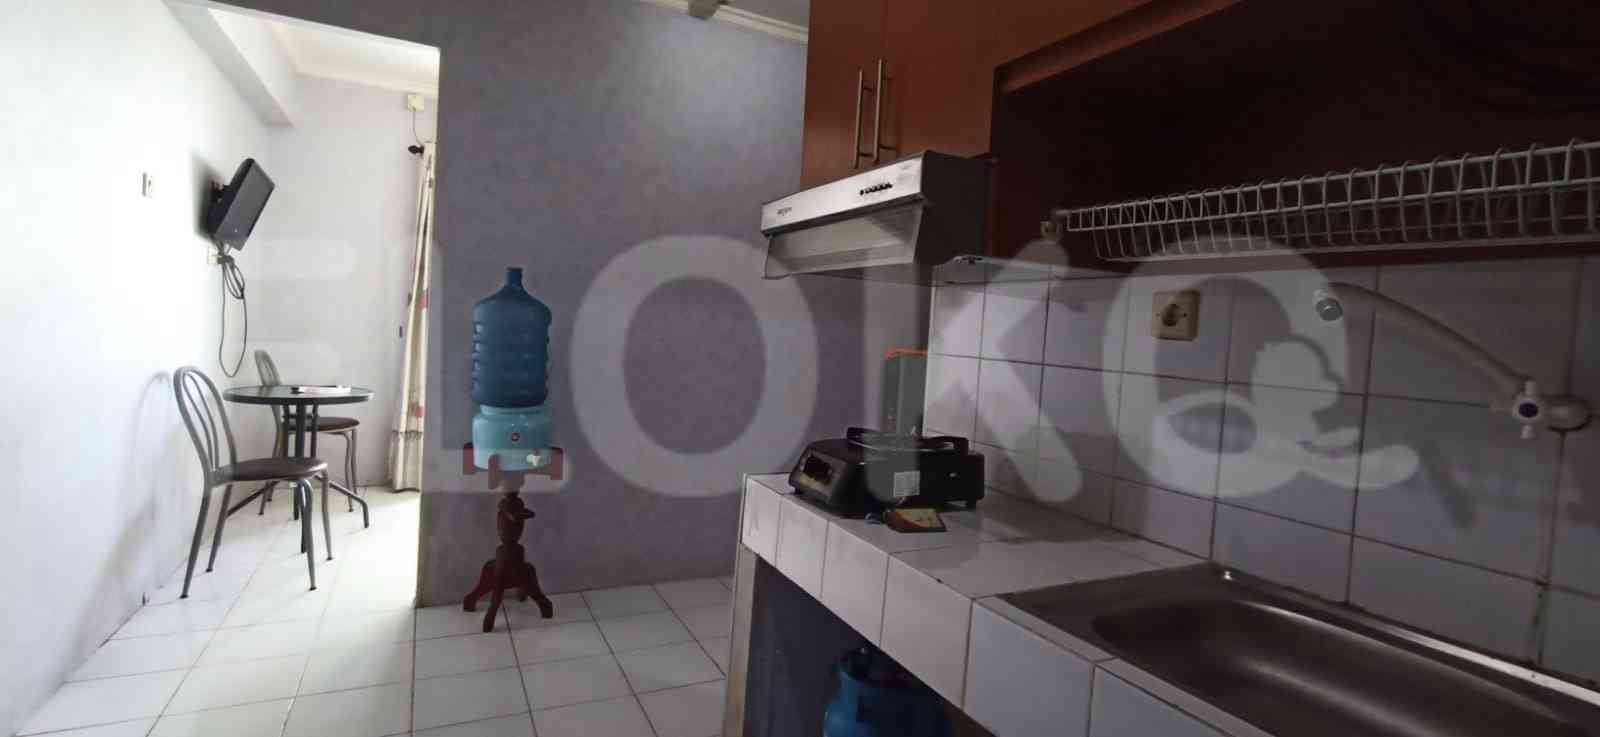 1 Bedroom on 7th Floor for Rent in Sentra Timur Residence - fca1ac 1